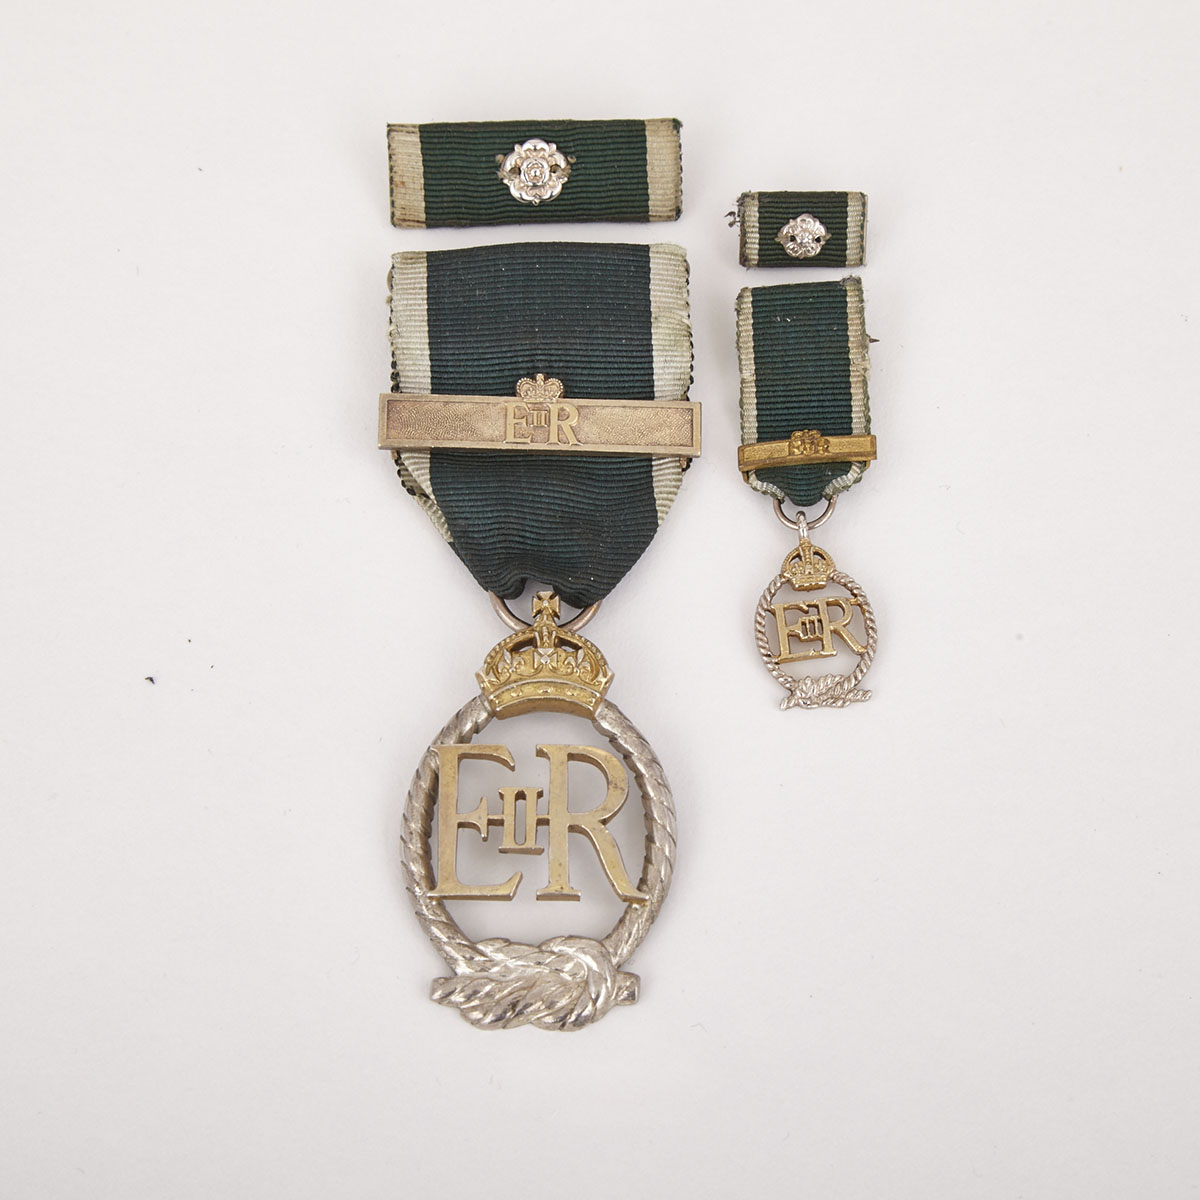 Queen Elizabeth II Royal New Zealand Naval Reserve Medal and Bar with Miniature, 1970